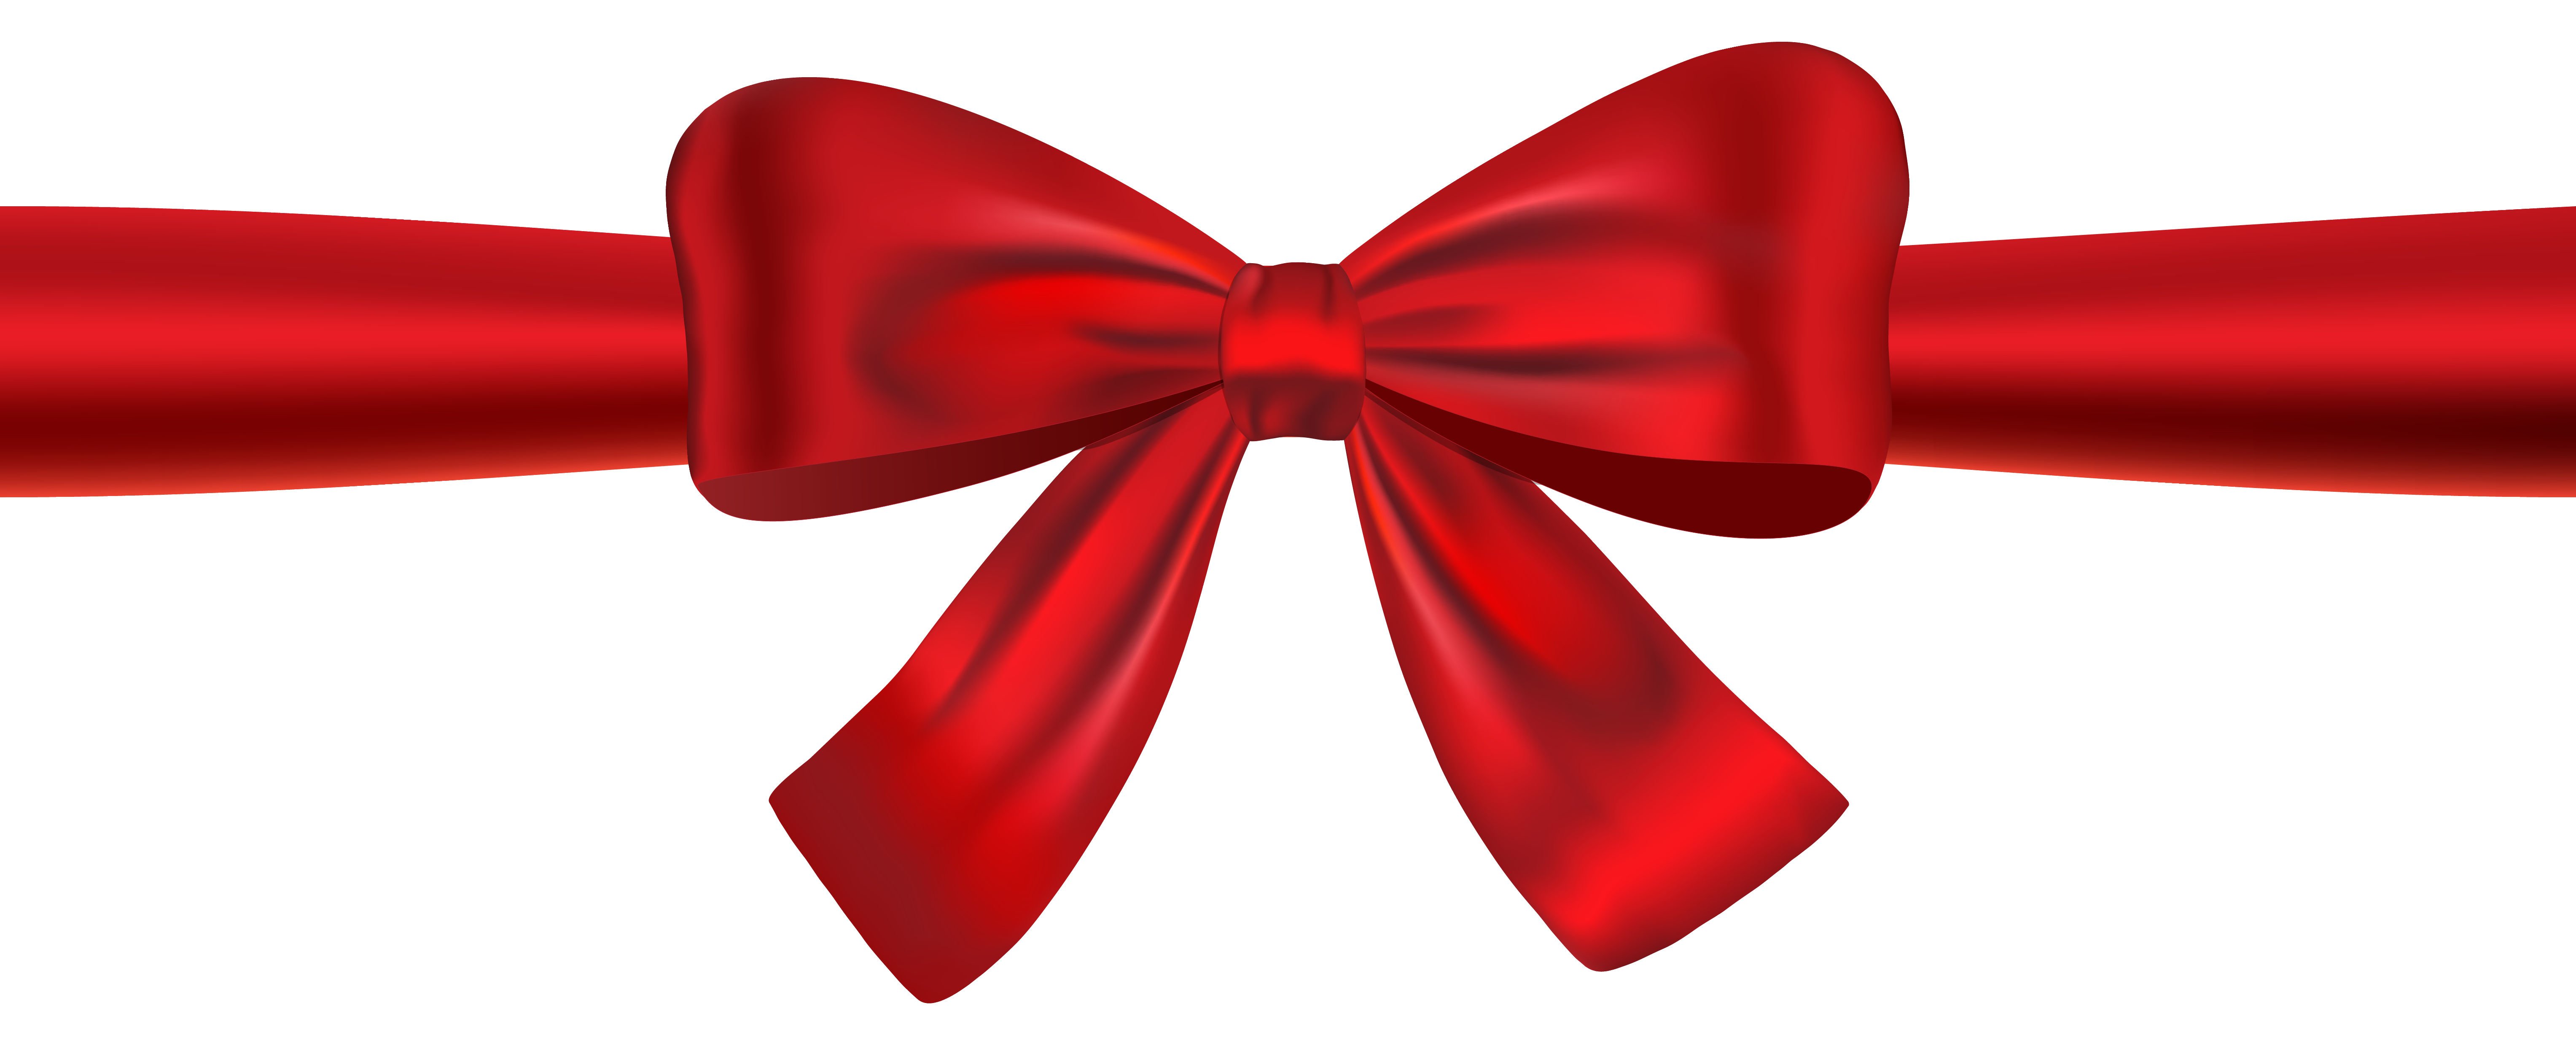 Free Holiday Bow Png, Download Free Holiday Bow Png png images, Free ...